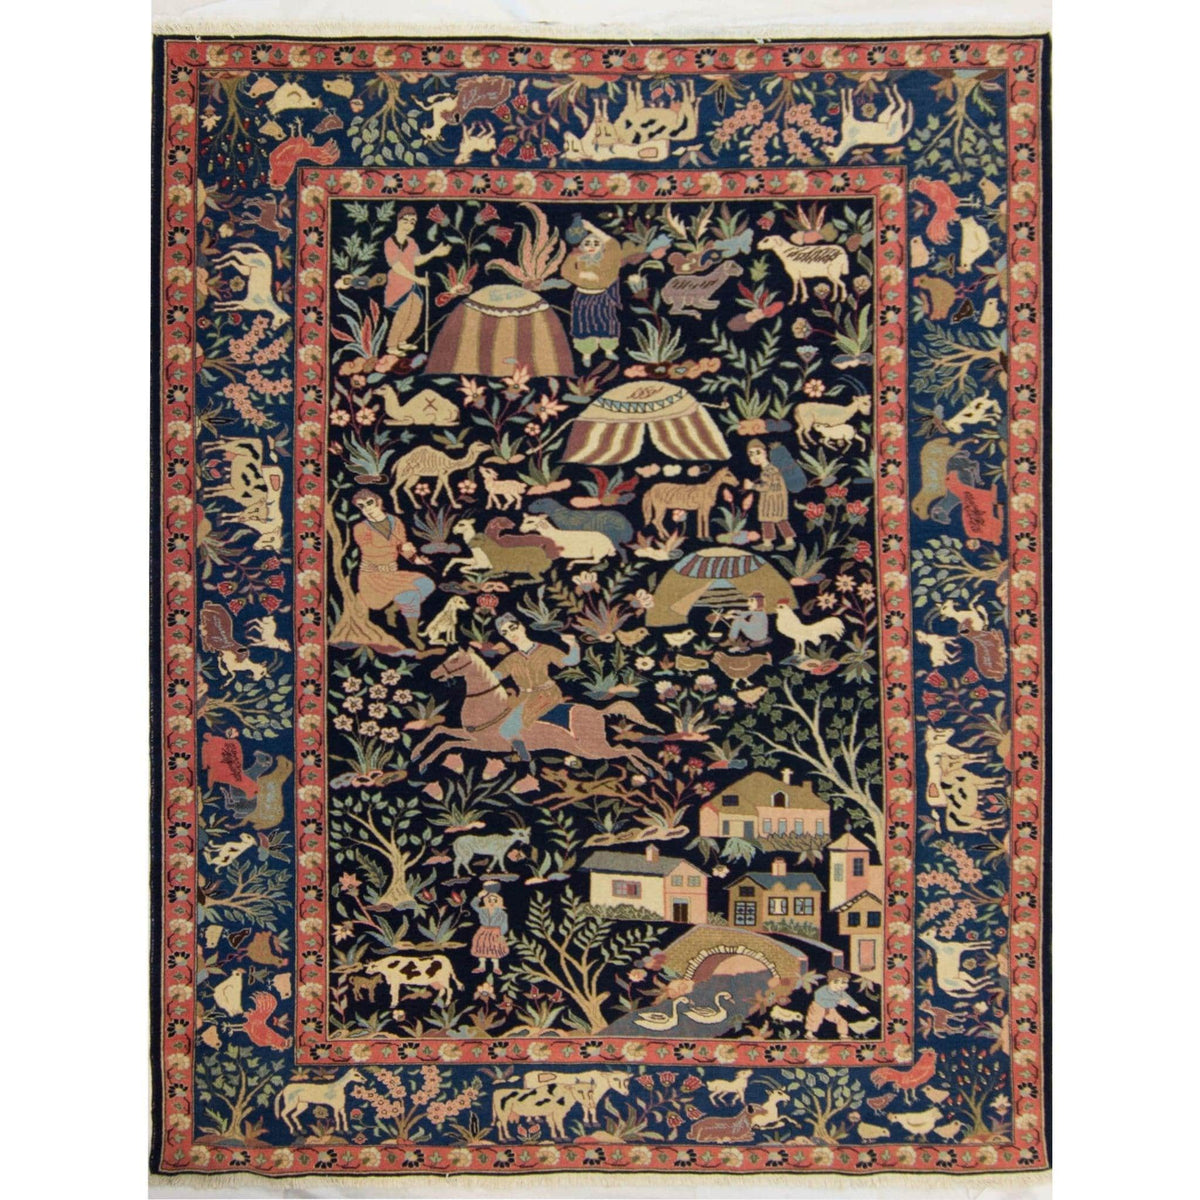 Collectible Fine Hand-knotted Persian Wool Baluchi Rug 215cm x 273cm